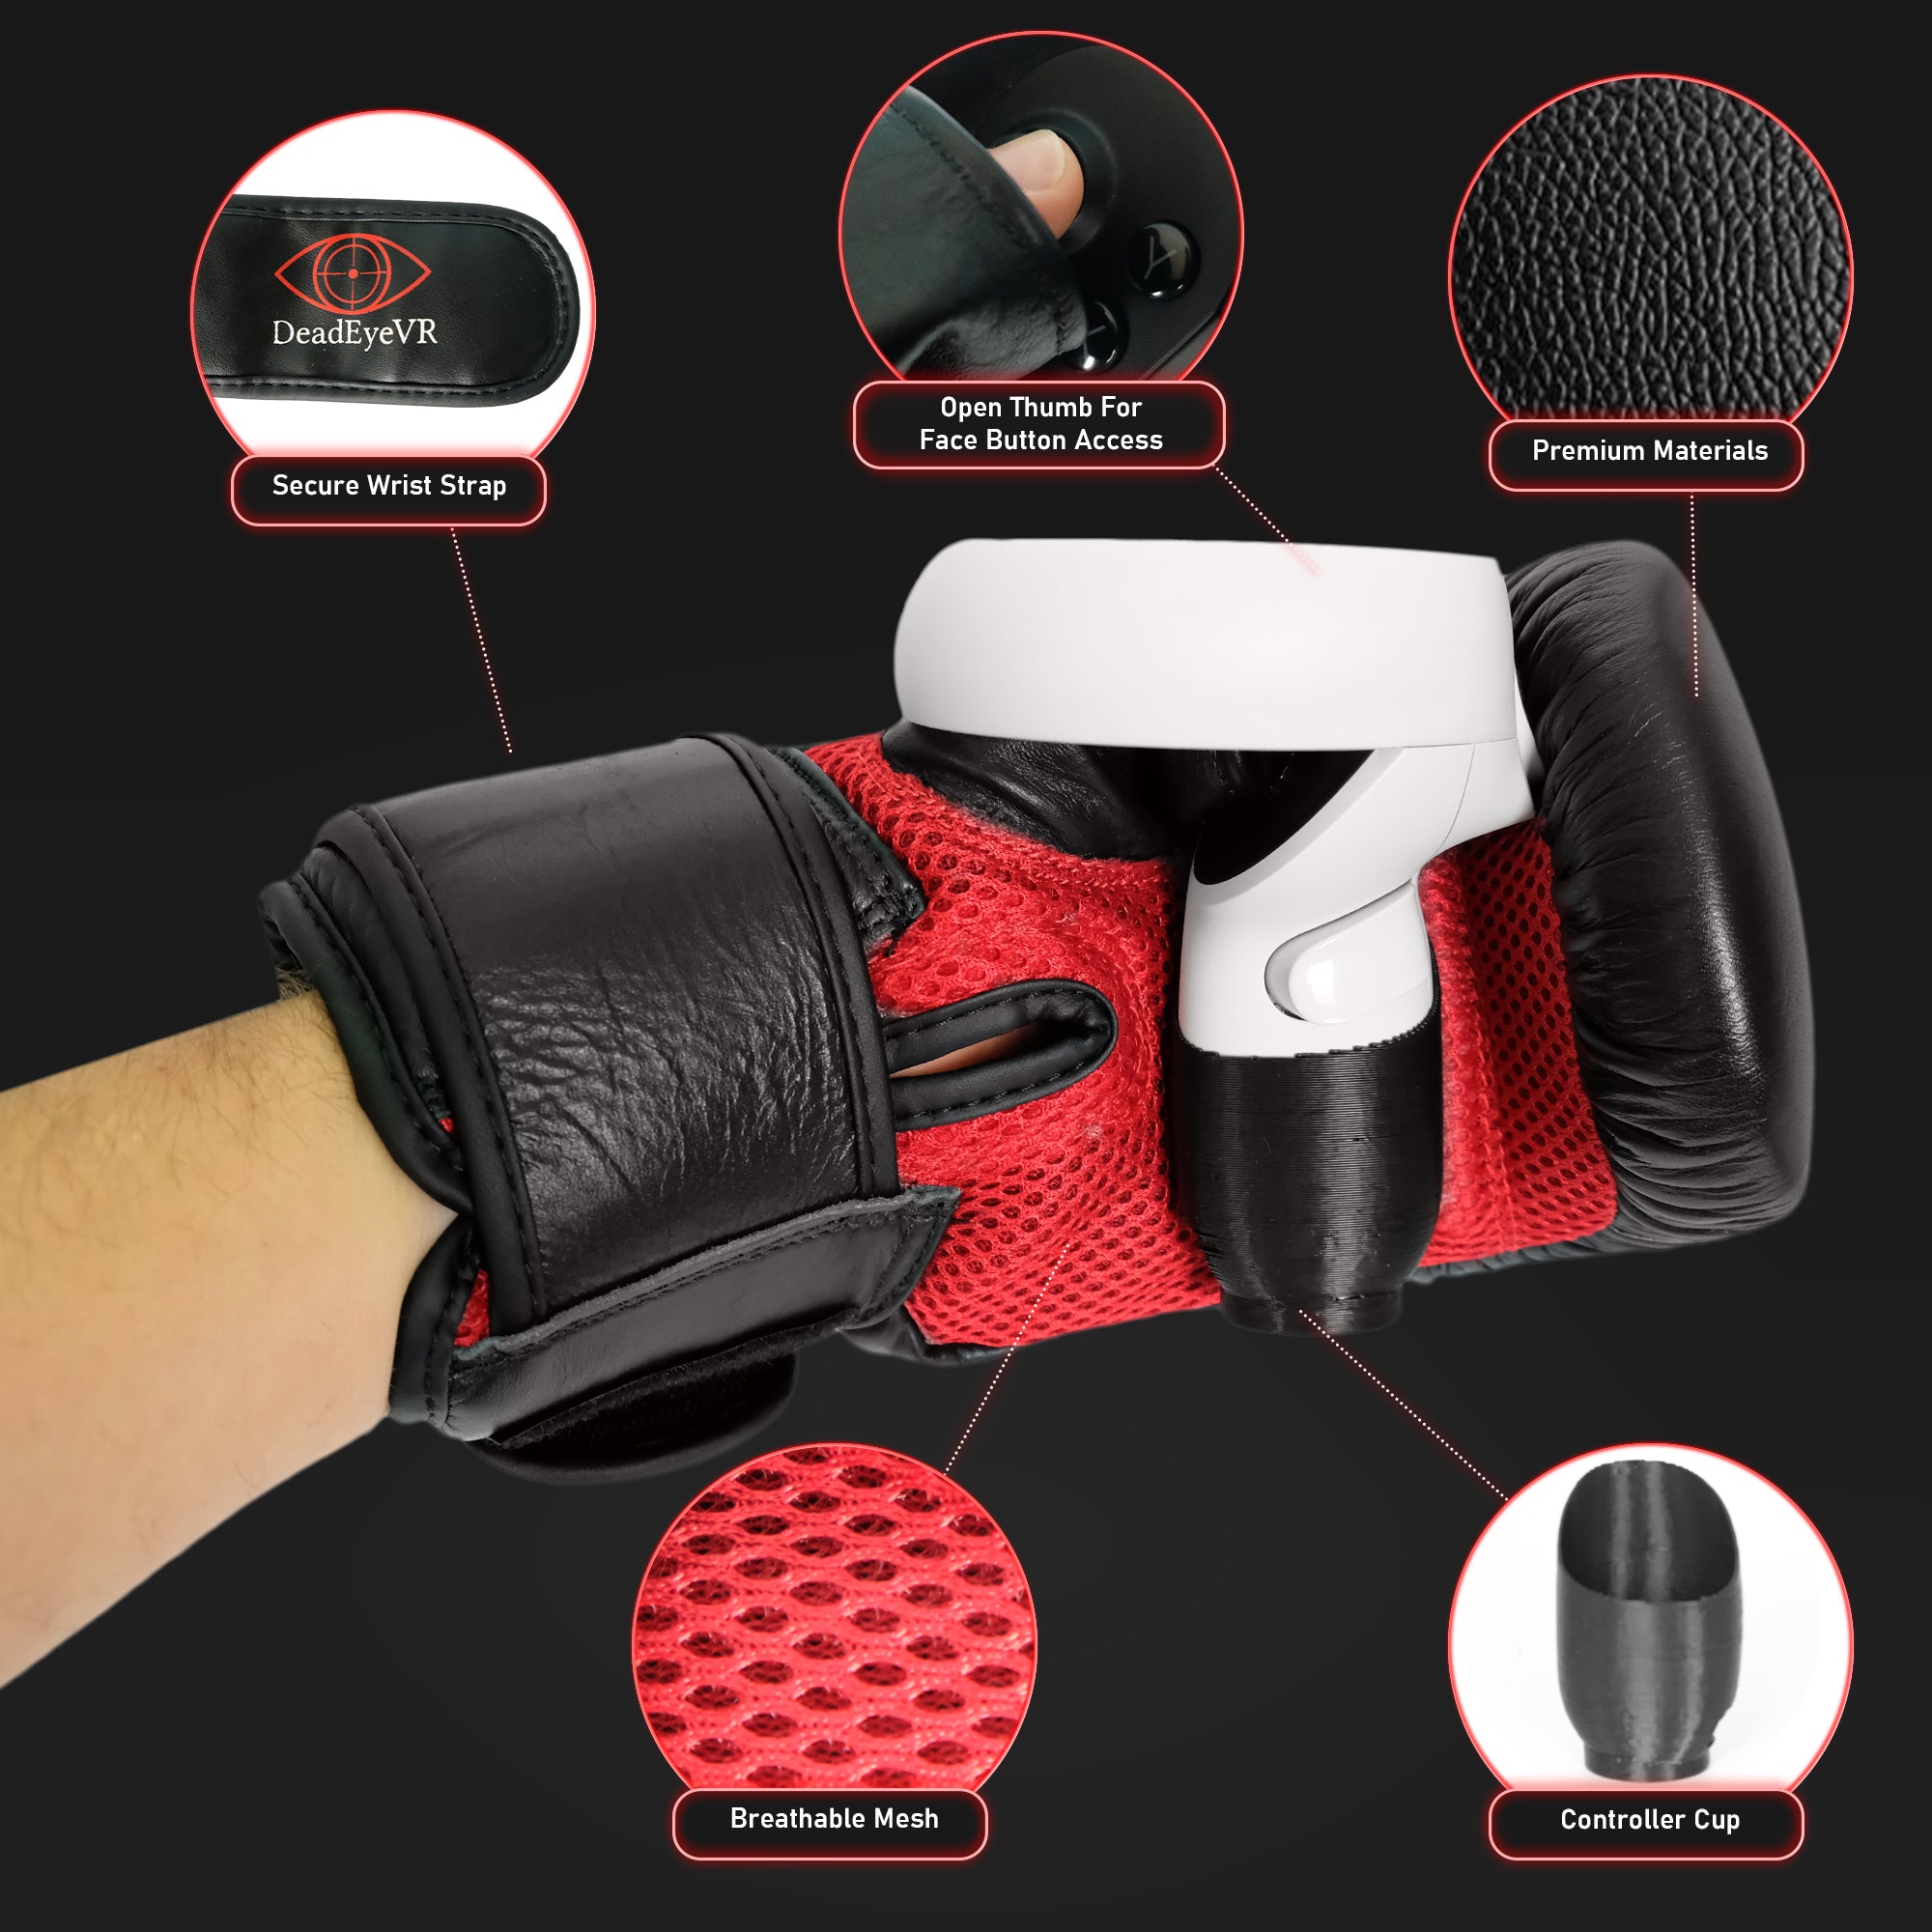 Features: Secure Wrist Strap. Open thumb for face button access. Premium Materials. Breathable Mesh. Controller cup